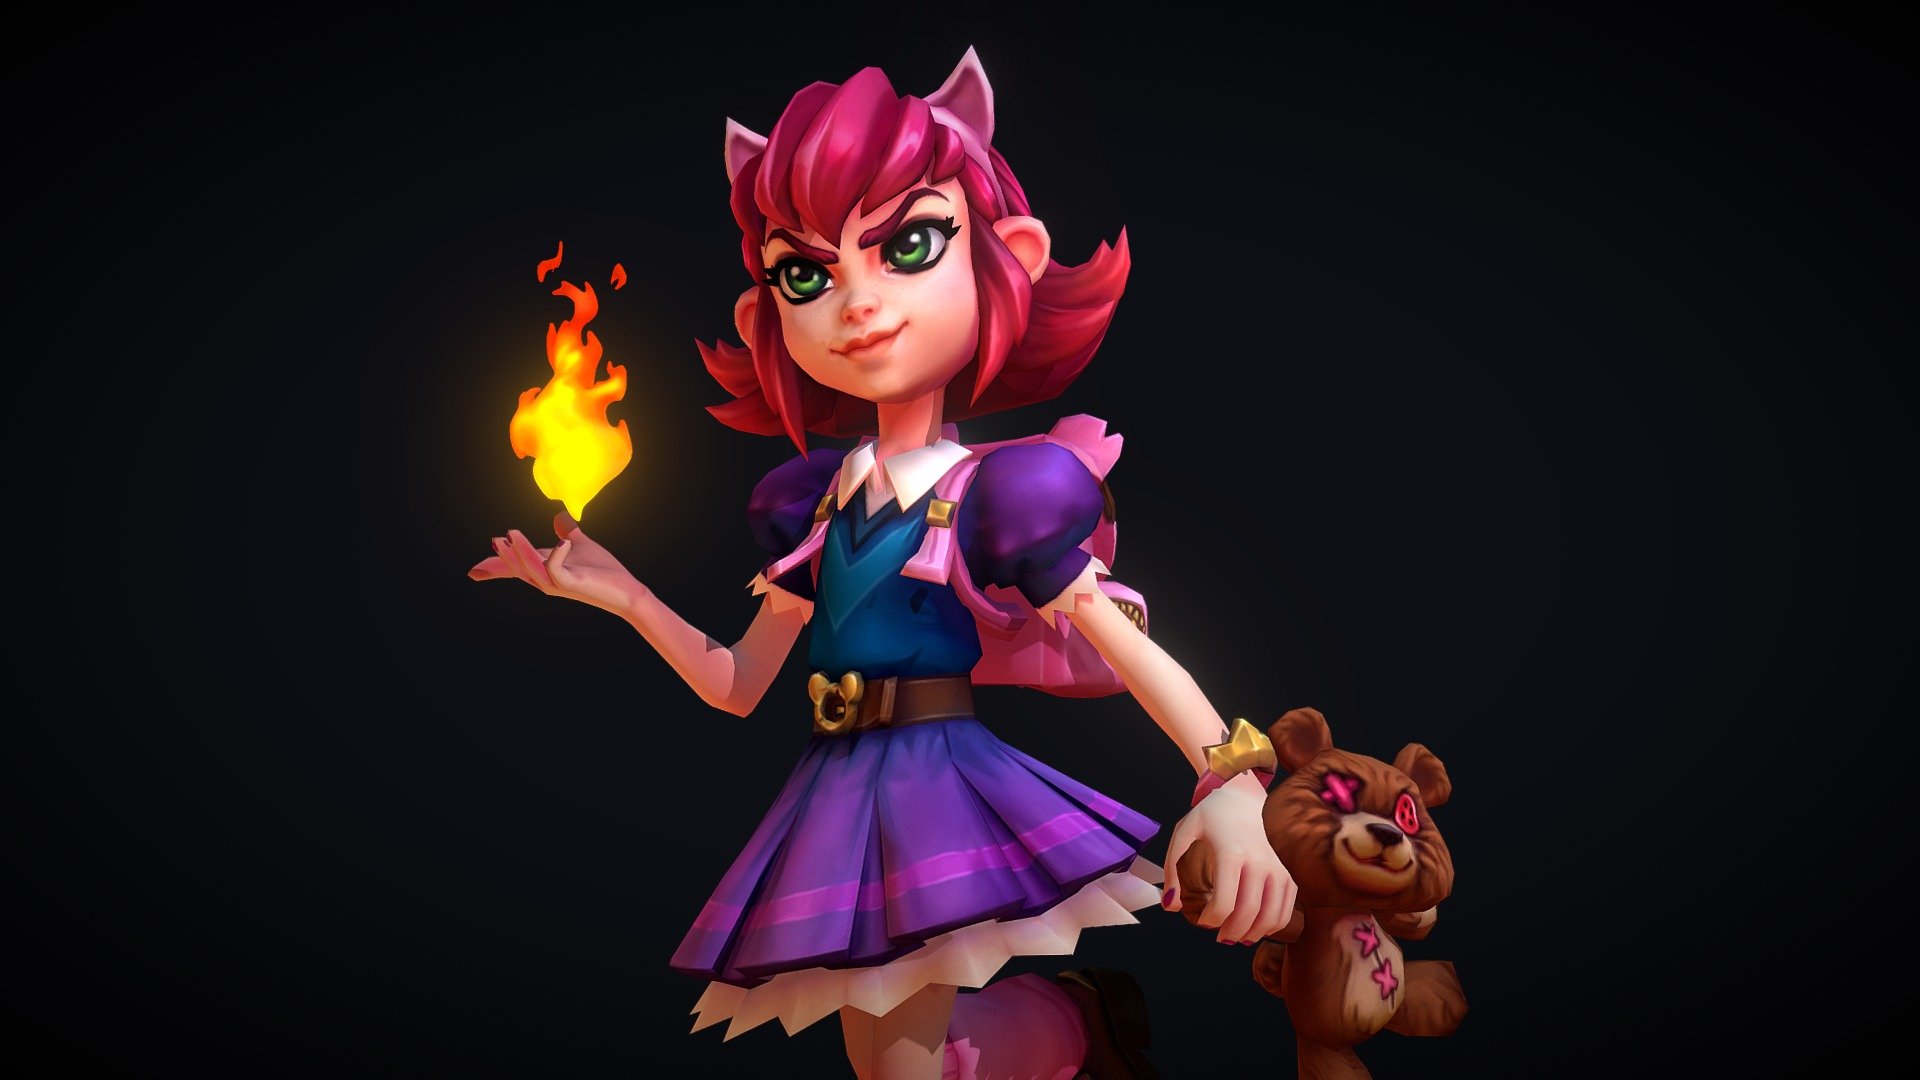 Here is my personal take on Annie from League of Legend.
Polycount is 9638 triangles.
Texture is 1024.
During the process I used Zbrush for the blocking, 3Ds max for the UVs and some of the modeling, Substance Painter for baking and first texture pass, 3D coat for retopo and final texture painting and Photoshop for final texture polish.
More shots and turnarounds on my artstation :
https://www.artstation.com/morganemalville

Instagram : https://www.instagram.com/morganemalville/?hl=en
Twitter : https://twitter.com/MorganeMalville - Annie the Dark Child [League of Legend Fanart] - 3D model by morganemalville 3d model